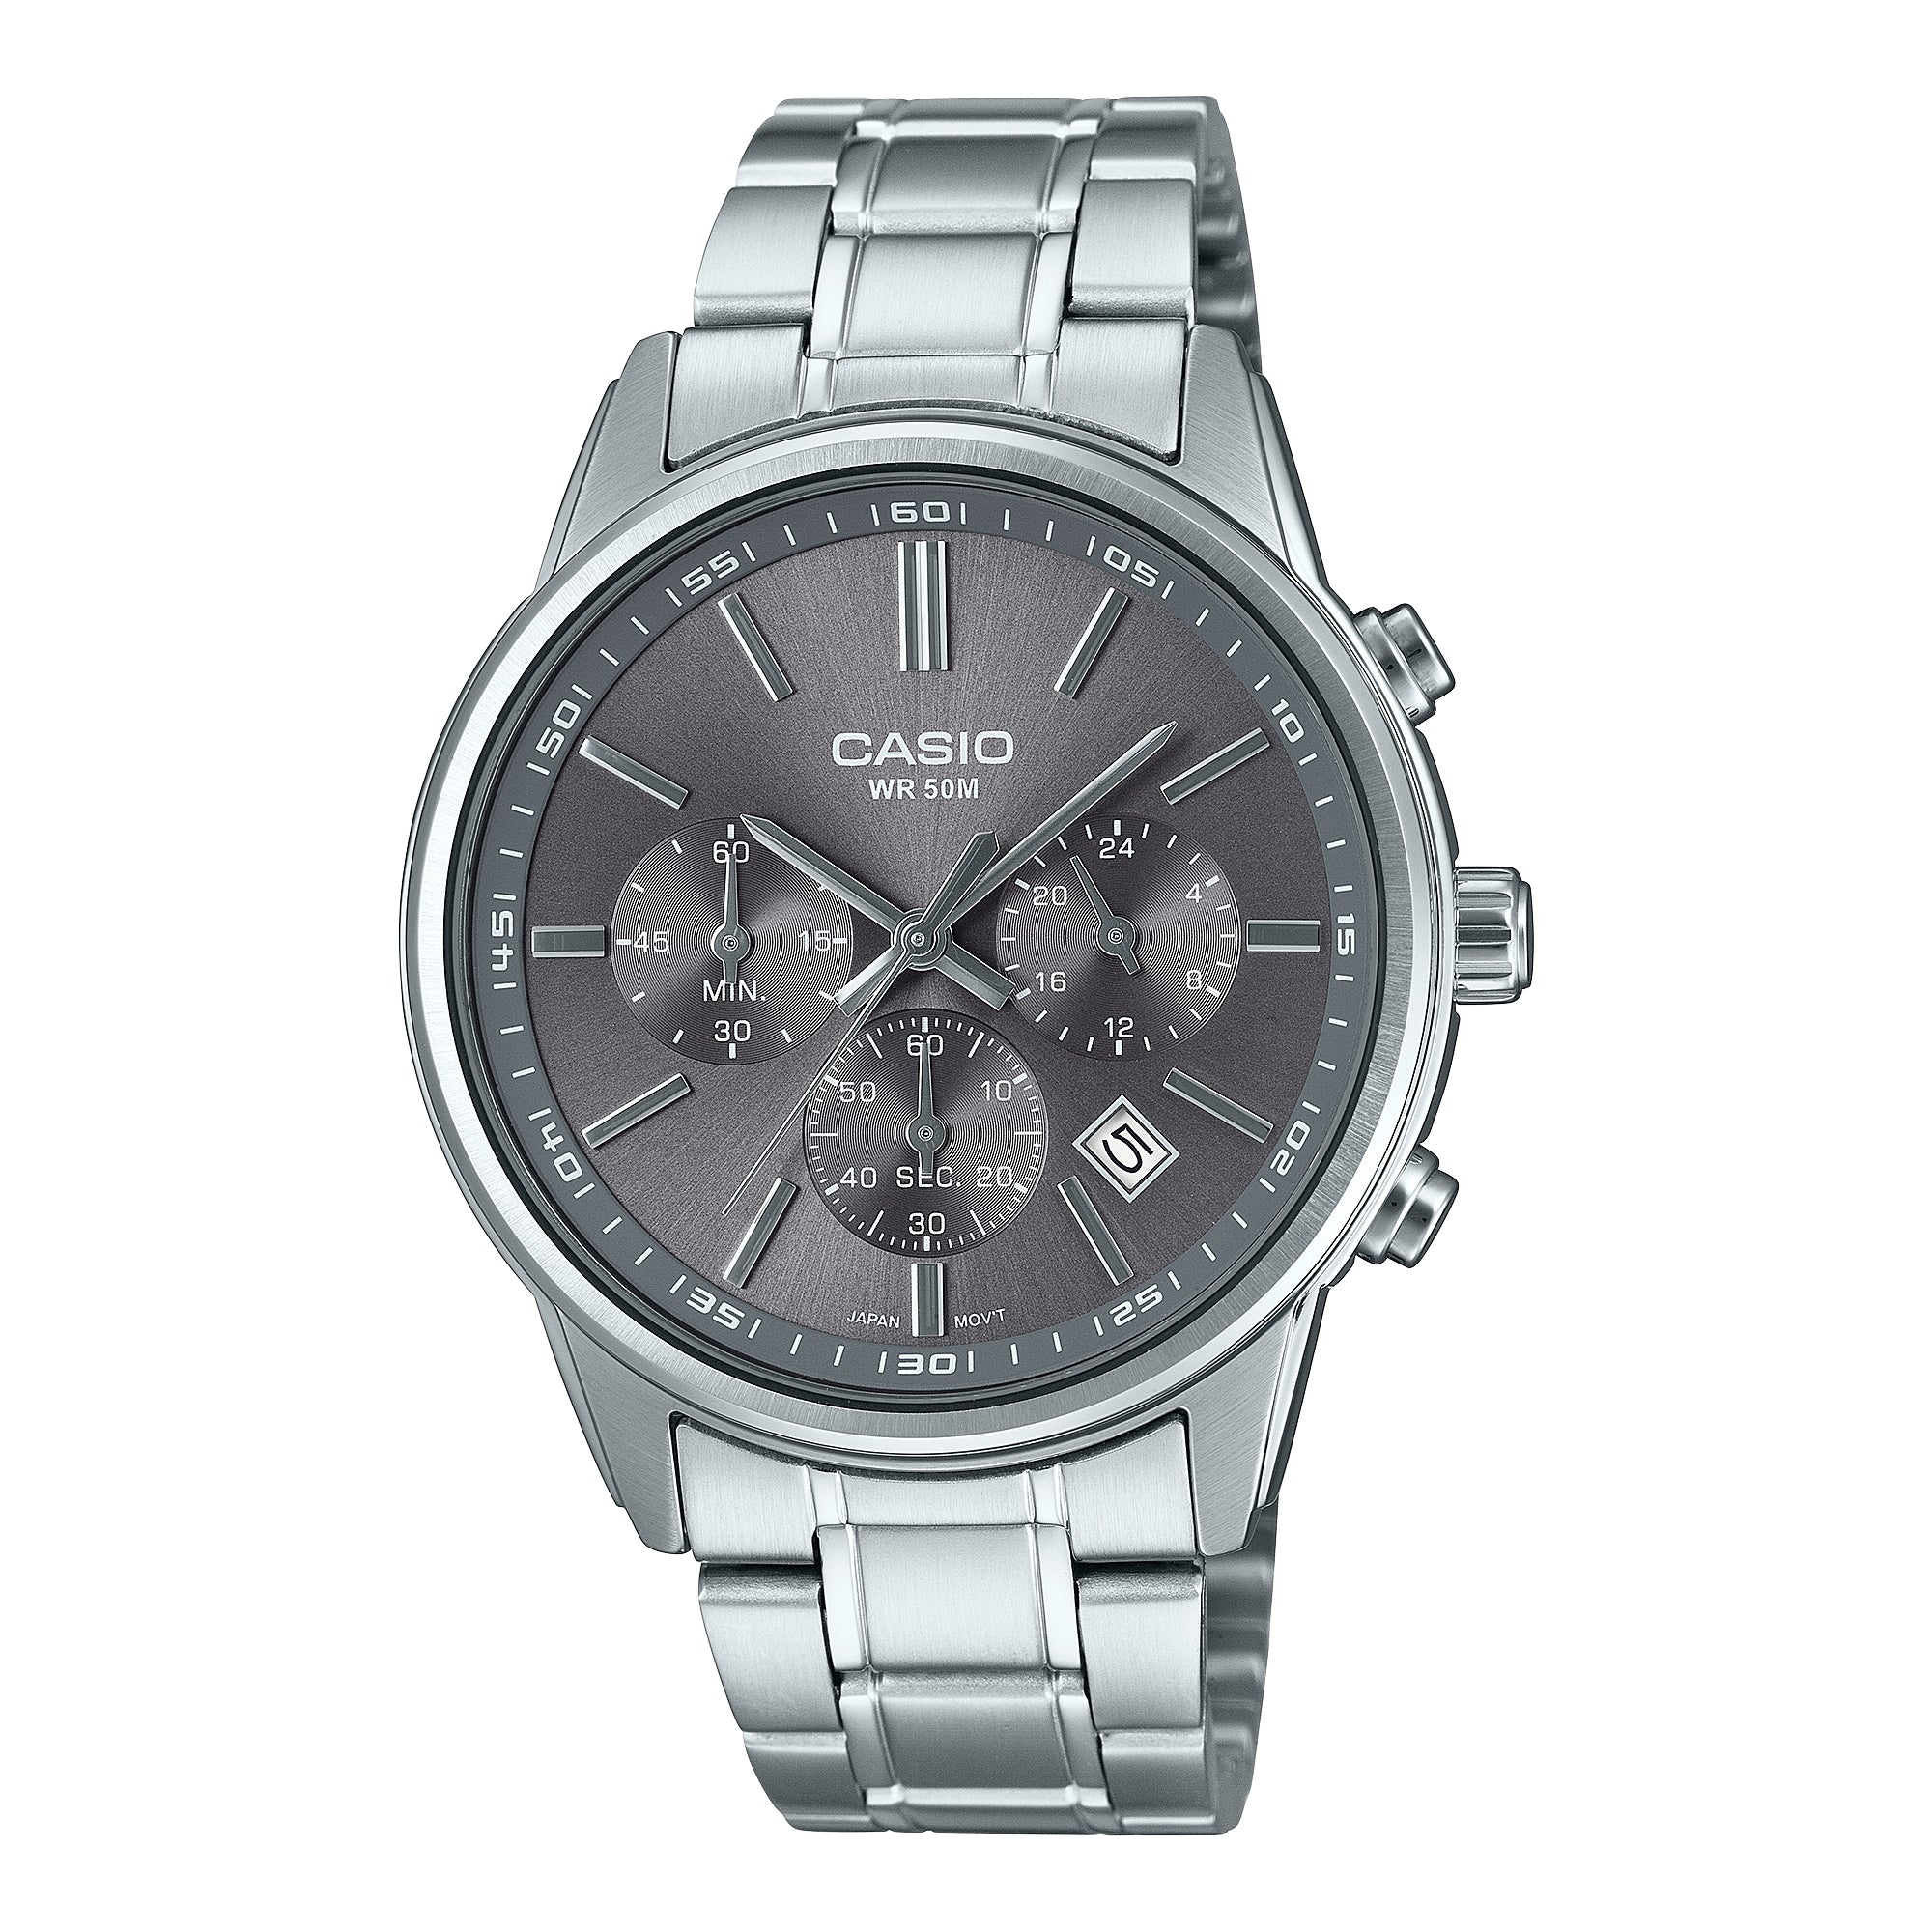 Casio Men's Analog Sporty Chronograph Stainless Steel Band Watch MTPE515D-8A MTP-E515D-8A